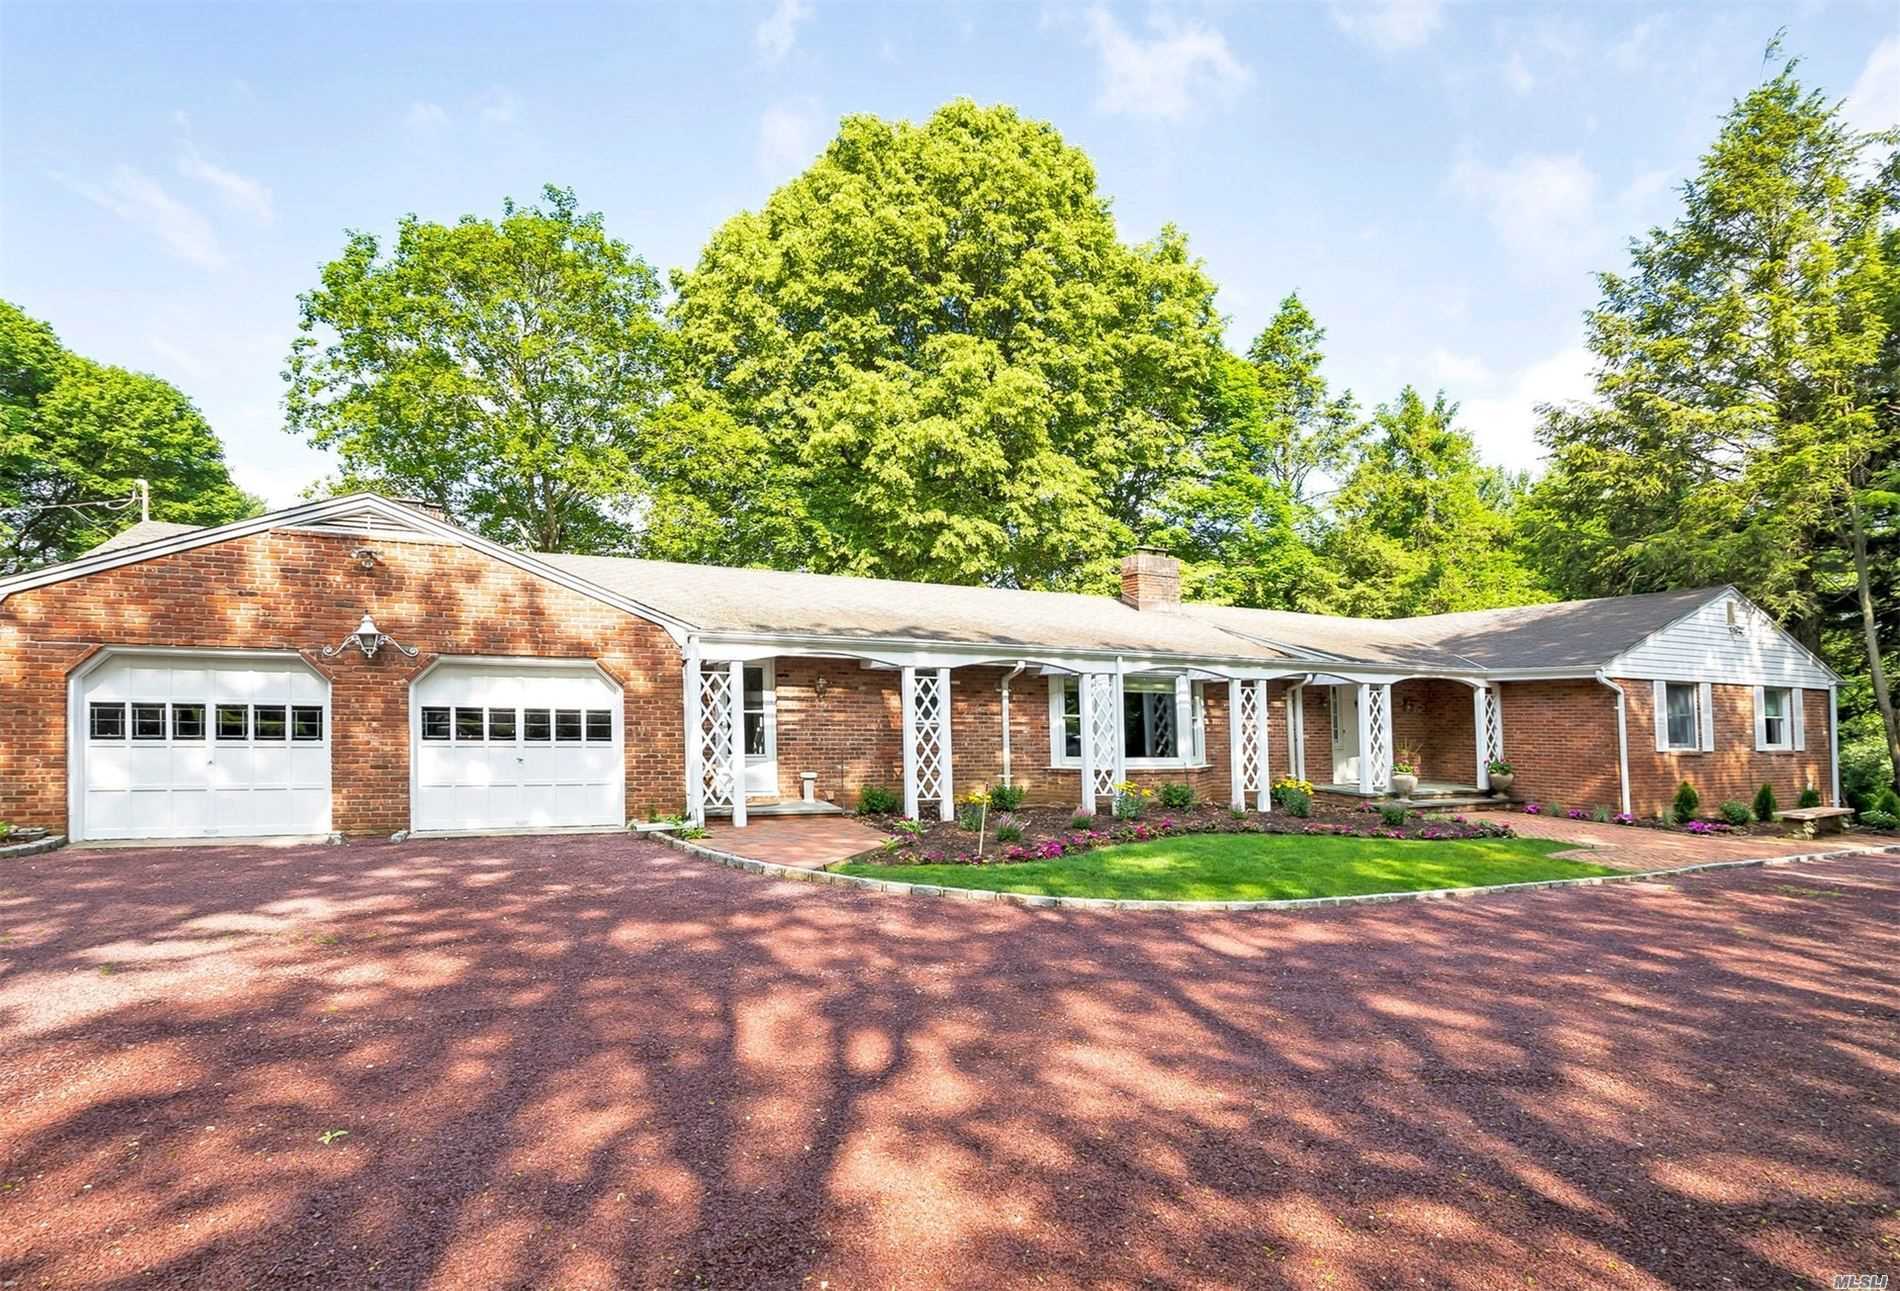 Majestic And Mature Park Like Property Just shy of 4 Acres Custom Built Mid Century Modern Sprawling Brick Ranch With Over Sized Rooms All with Views of Property Automatic Whole House Generator Perfectly Located In The Prestigious North Shore Schools